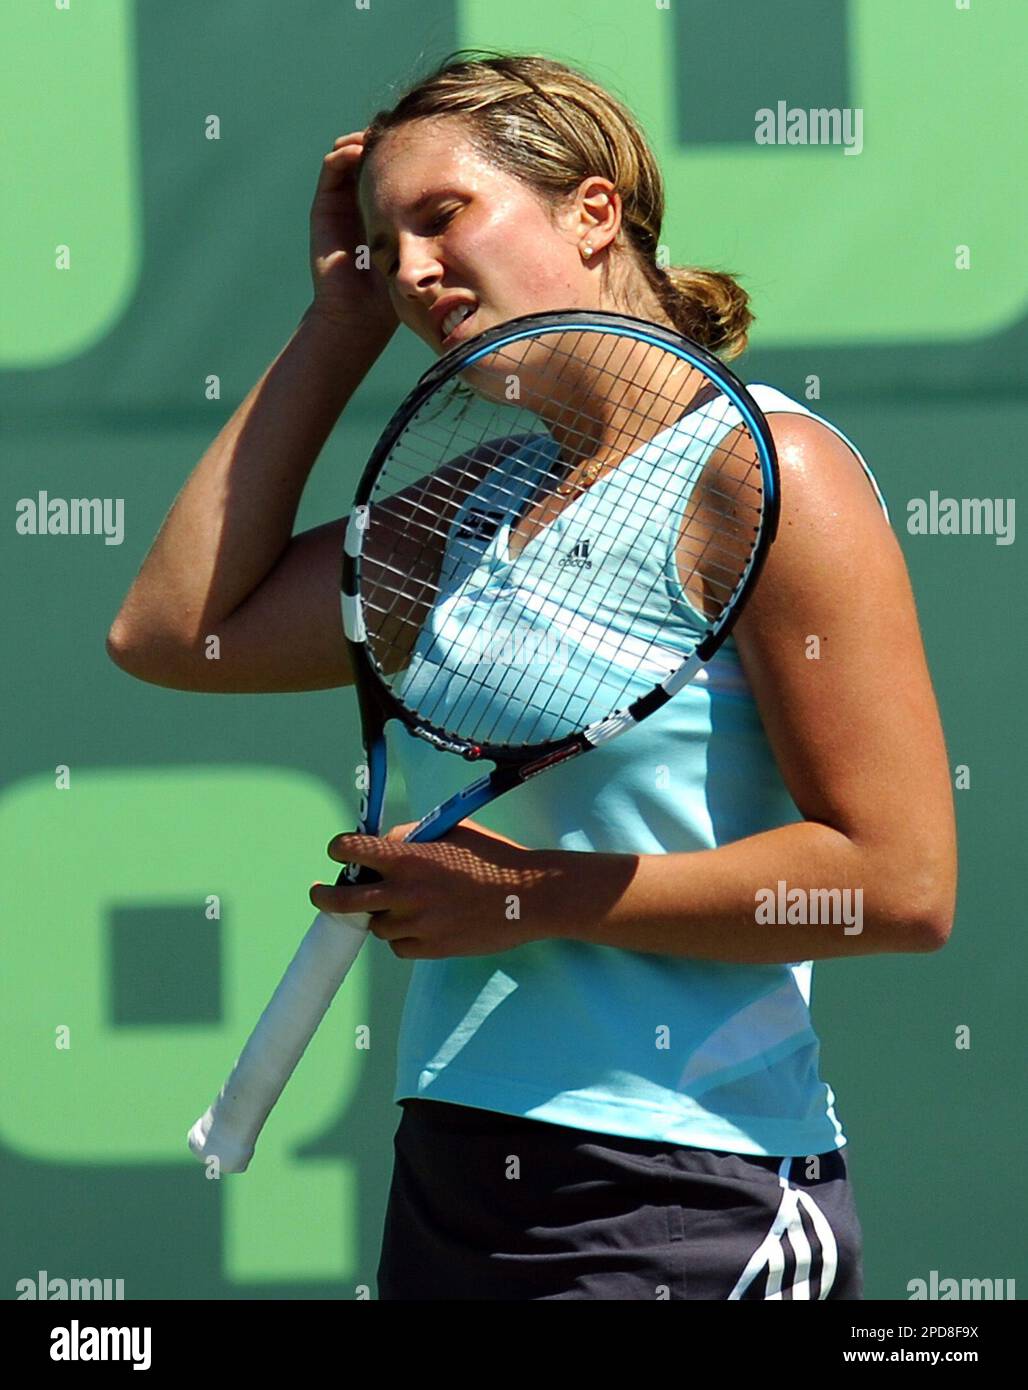 Sofia Arvidsson of Sweden reacts after losing a point to Meghann Shaughnessy of the United States during their match at the Nasdaq- 100 Open tennis tournament in Key Biscayne, Fla., Sunday, March 26, 2006.(AP Photo/Steve Mitchell) Stock Photo